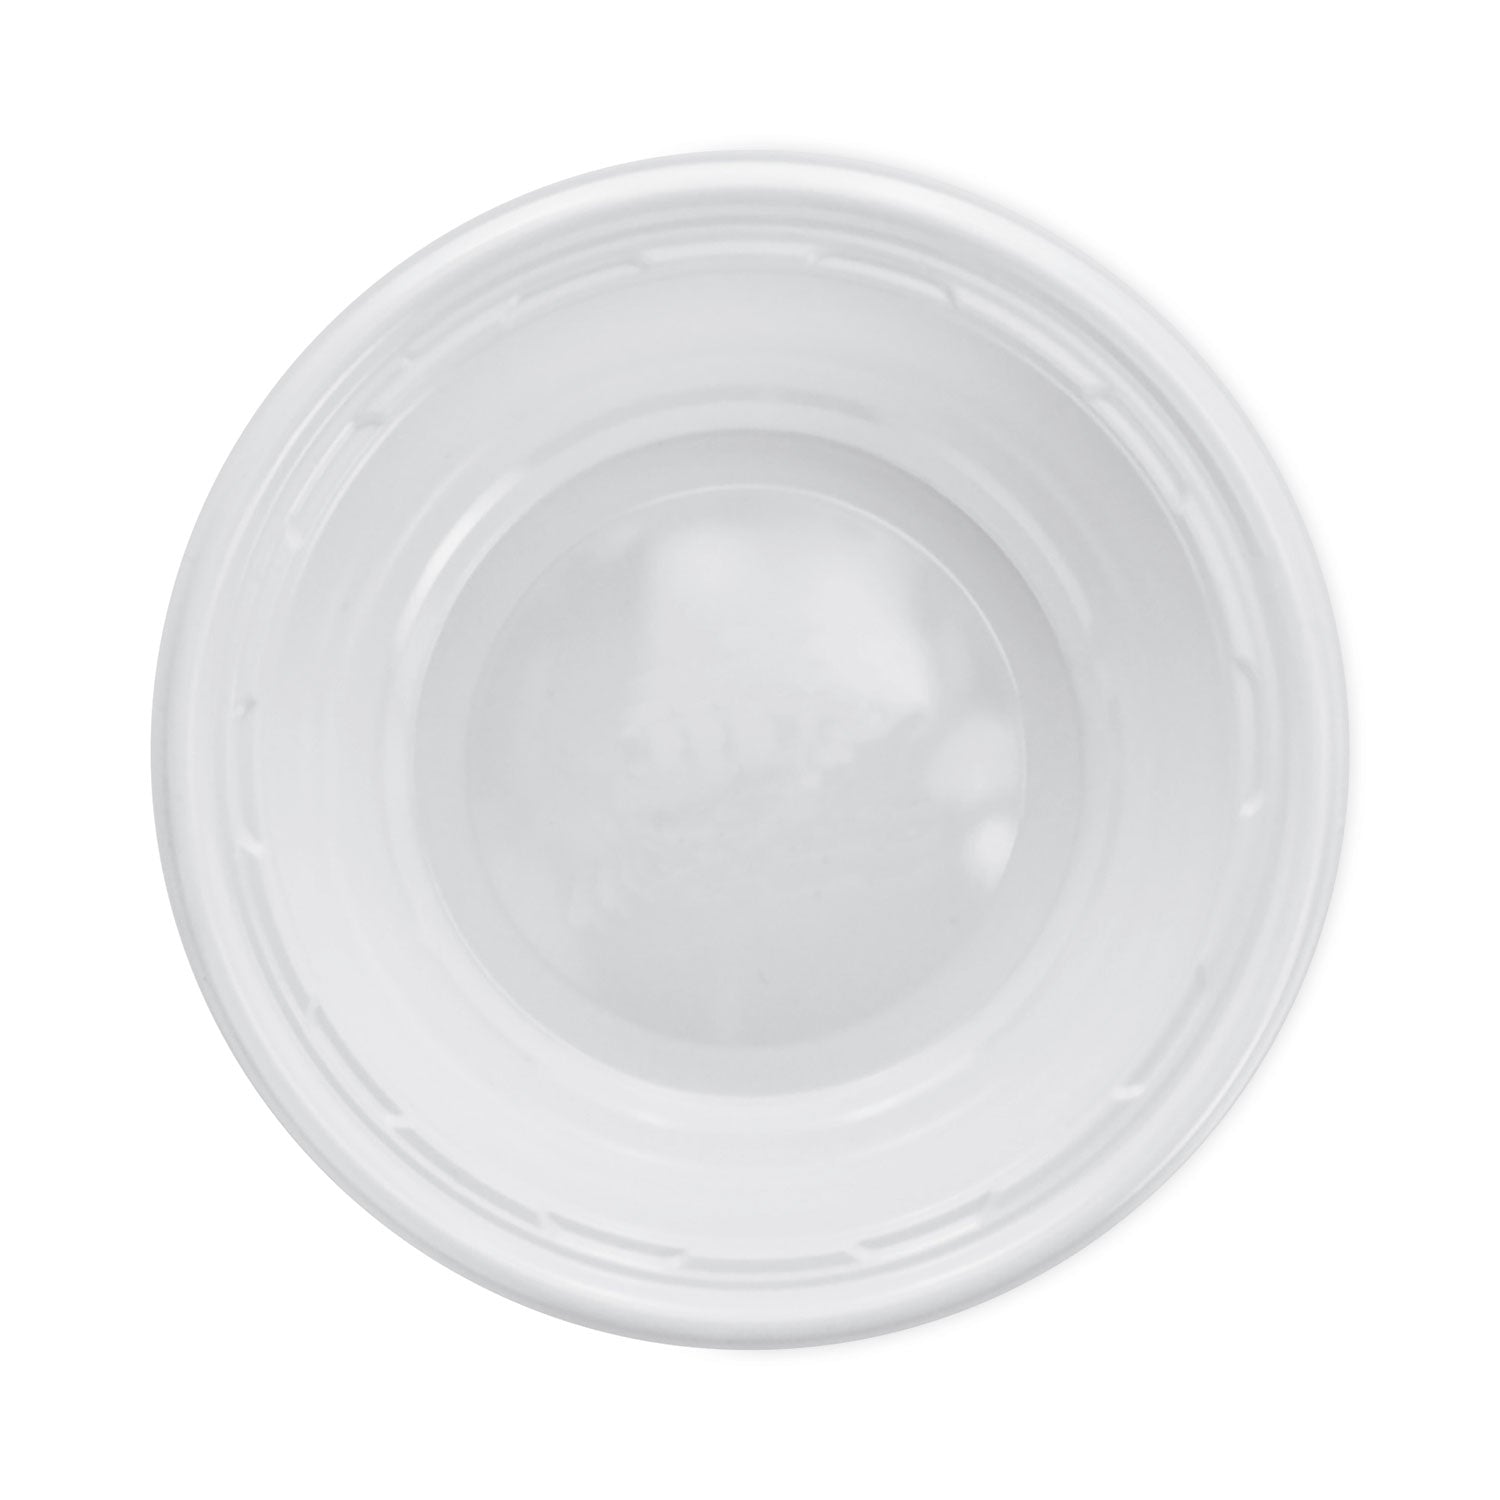 Famous Service Impact Plastic Dinnerware, Bowl, 5 to 6 oz, White, 125/Pack - 